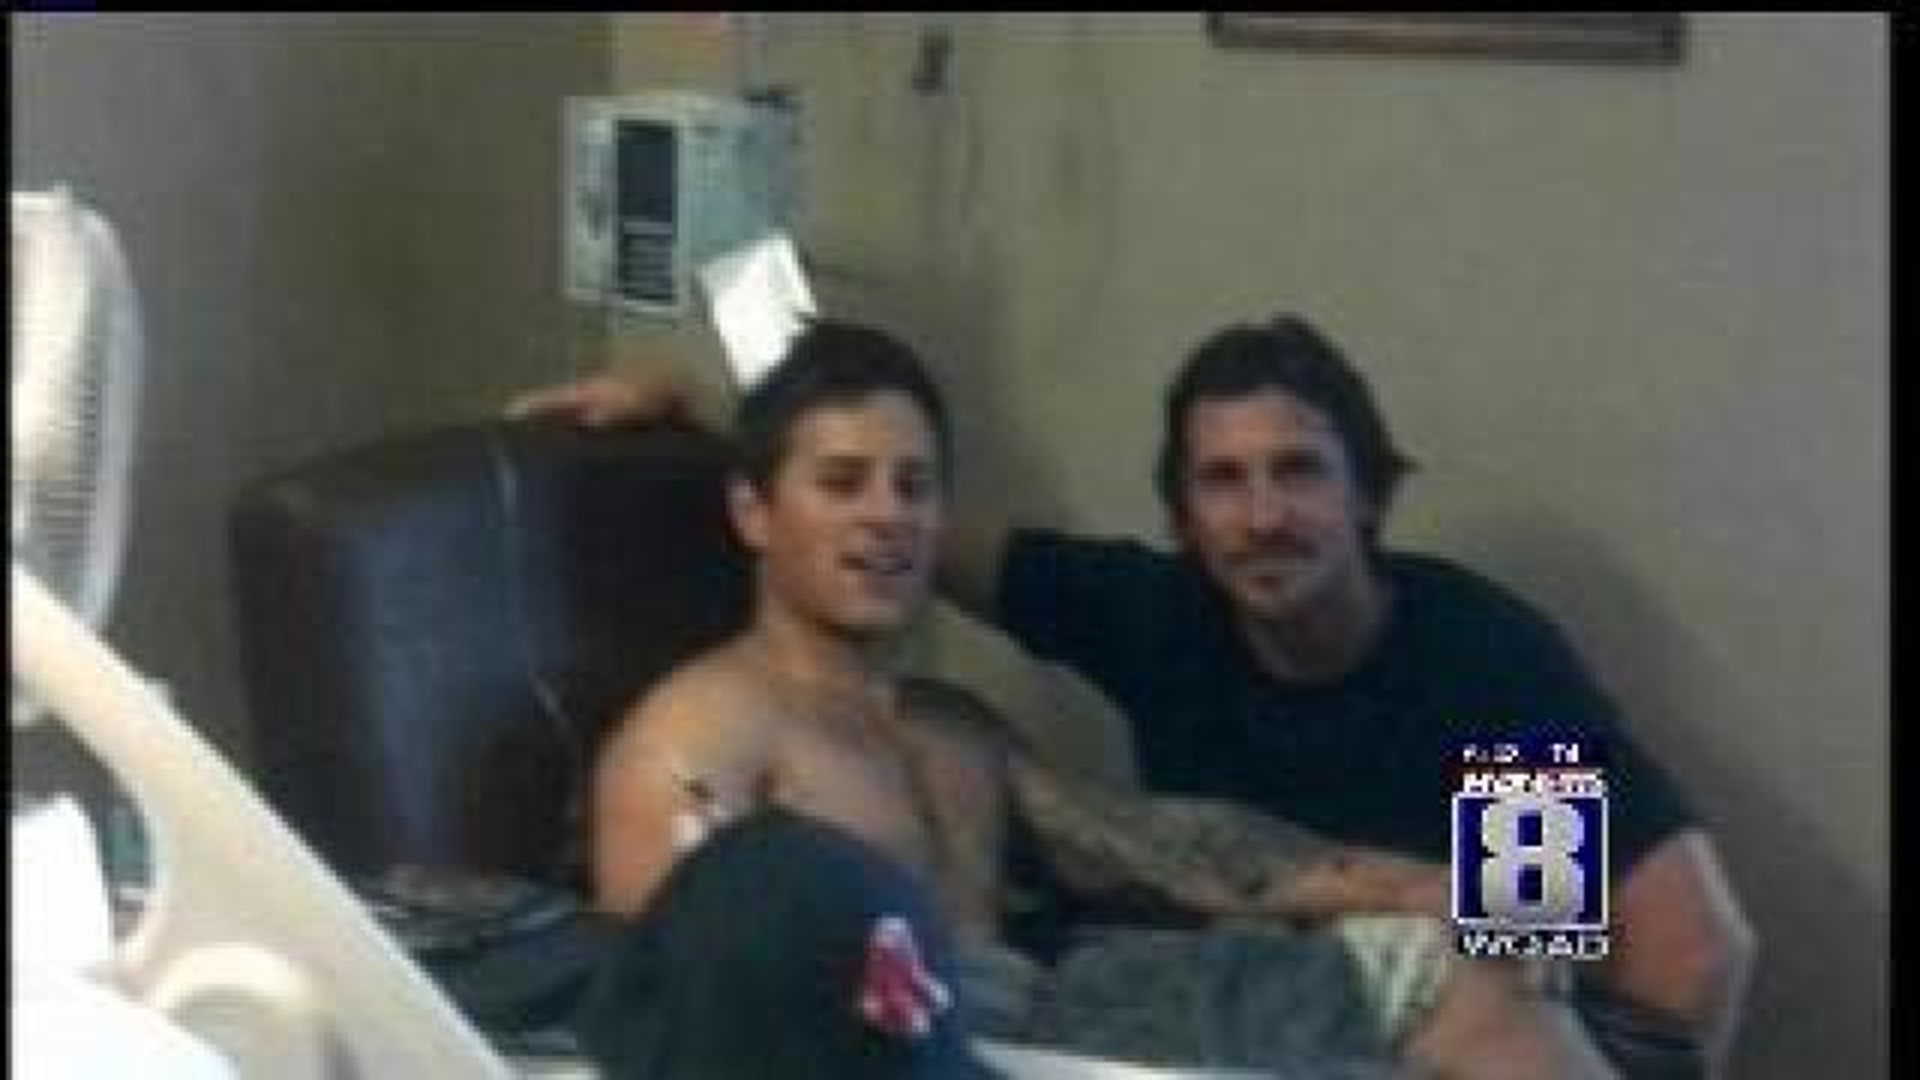 Christian Bale visits shooting victims in Aurora